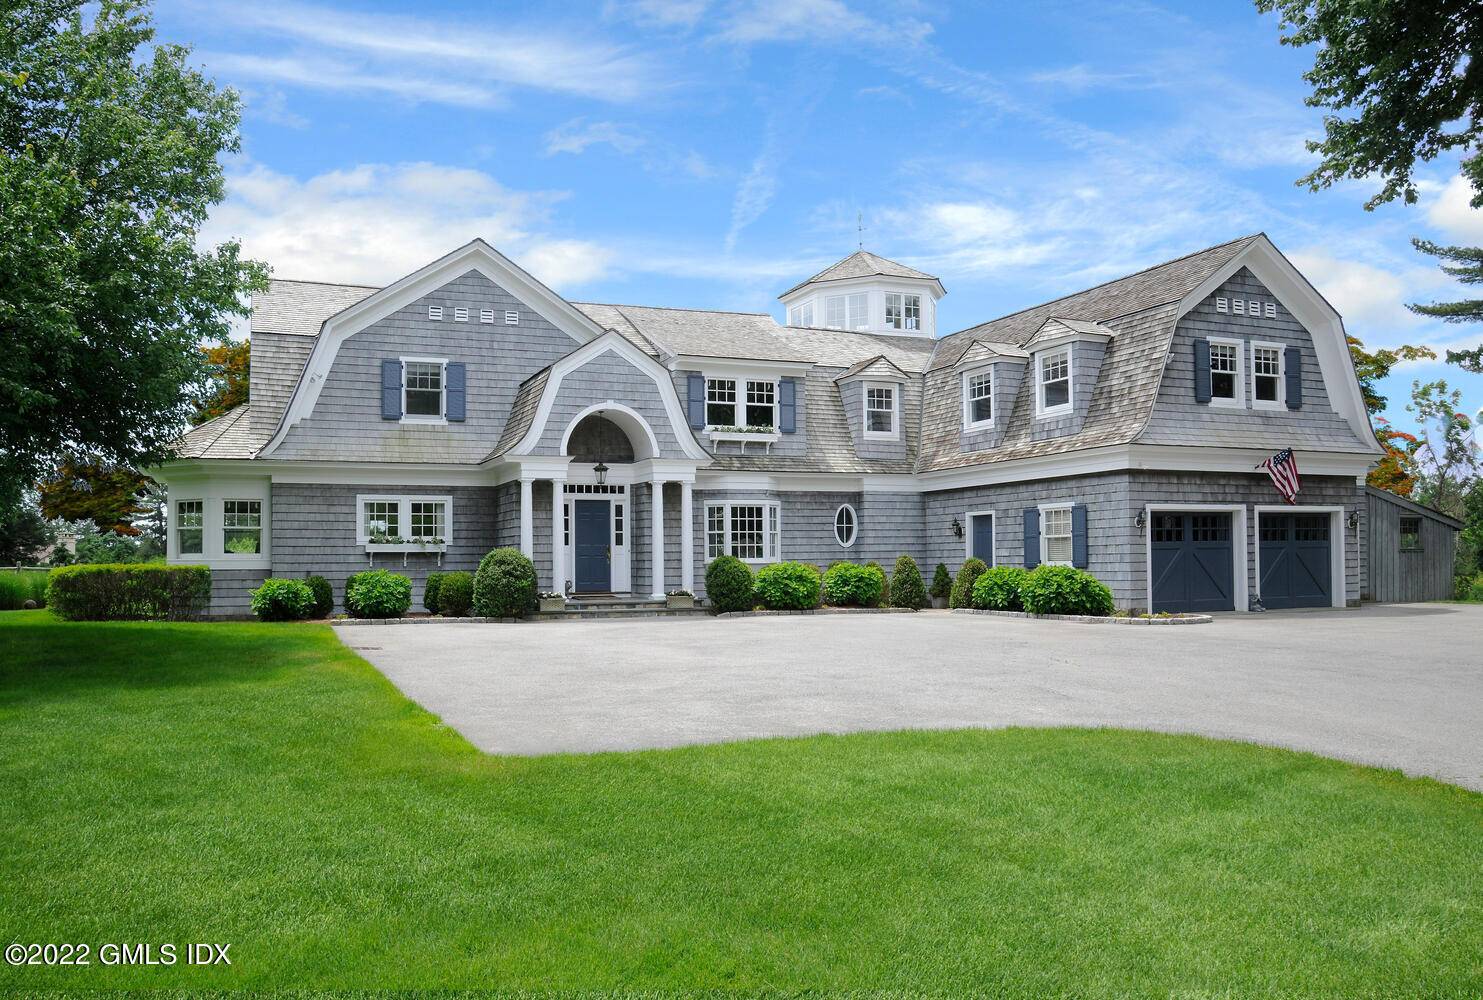 This warm, welcoming light filled shingle style home sits on 2.